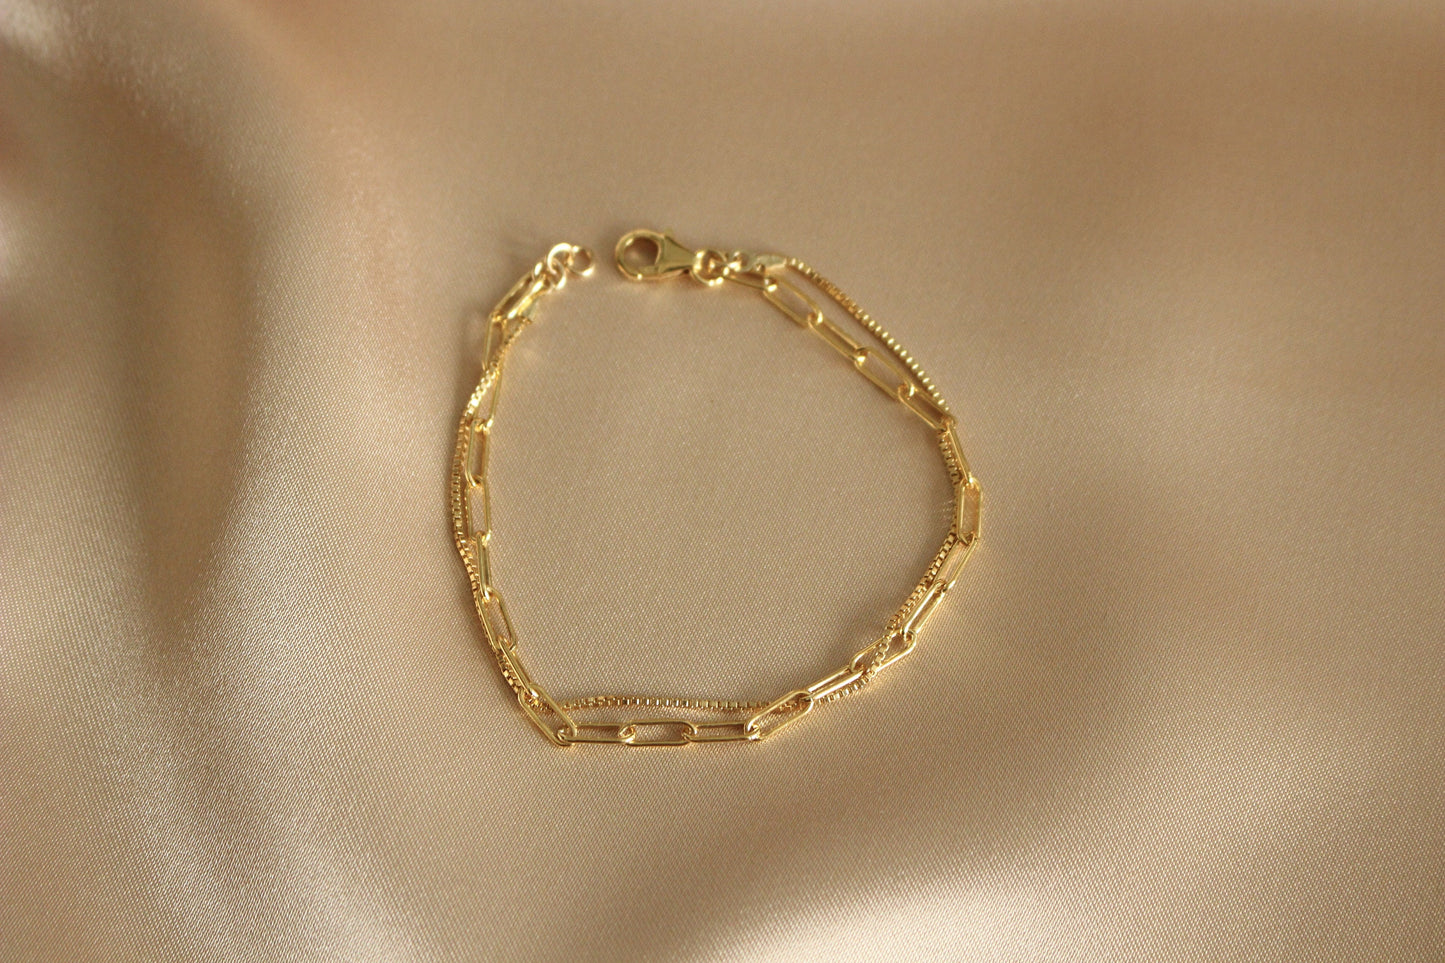 Set of 2 bracelets in real 14k gold filled - Paperclip and box chain